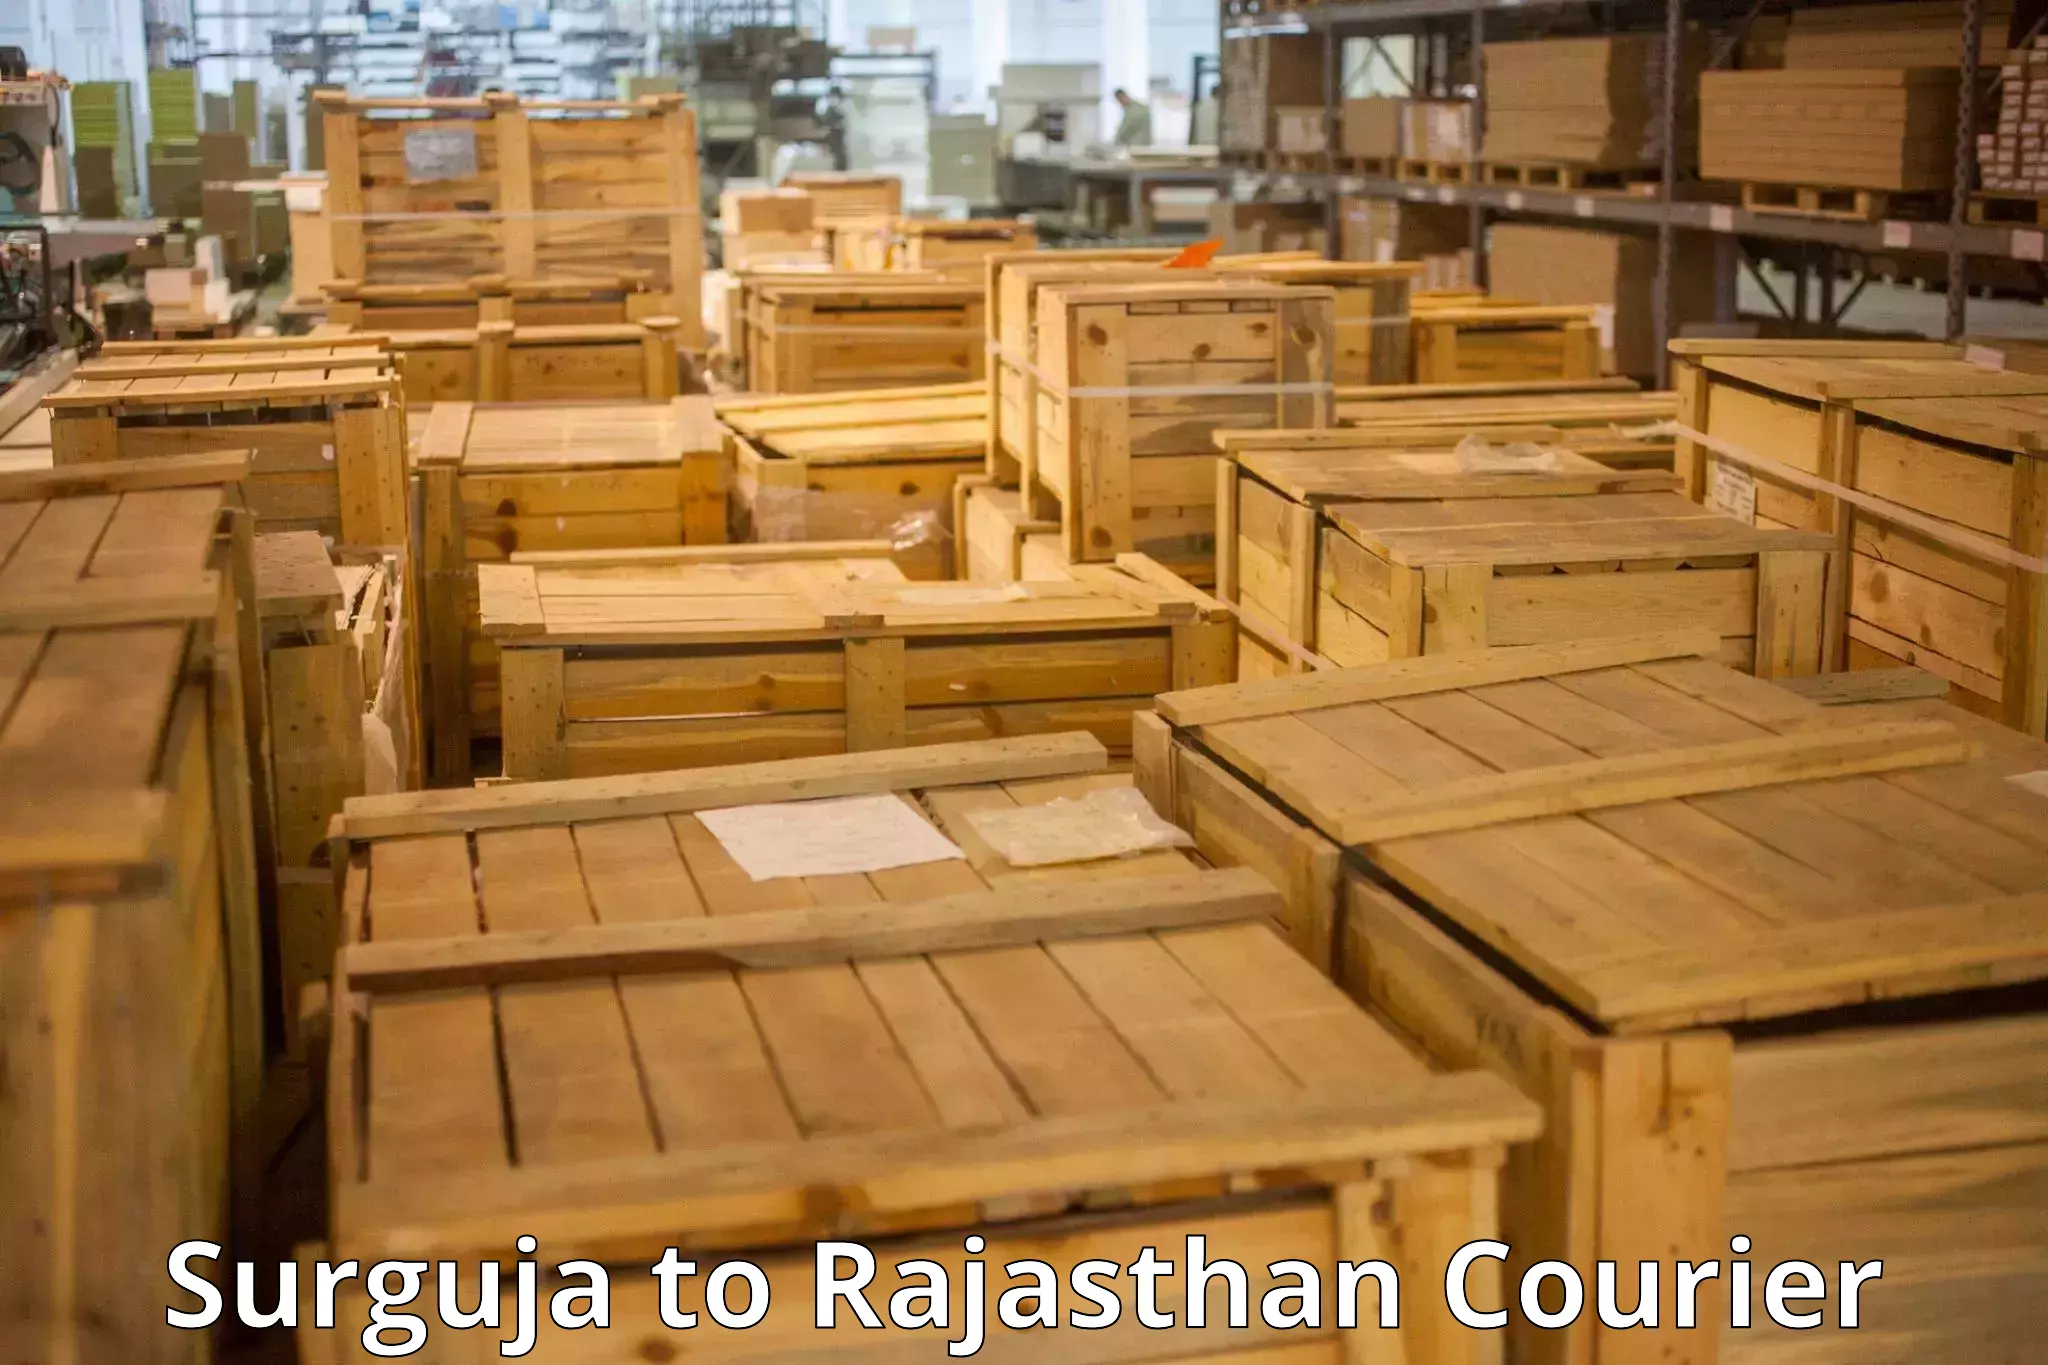 Luggage shipment specialists Surguja to Udaipur